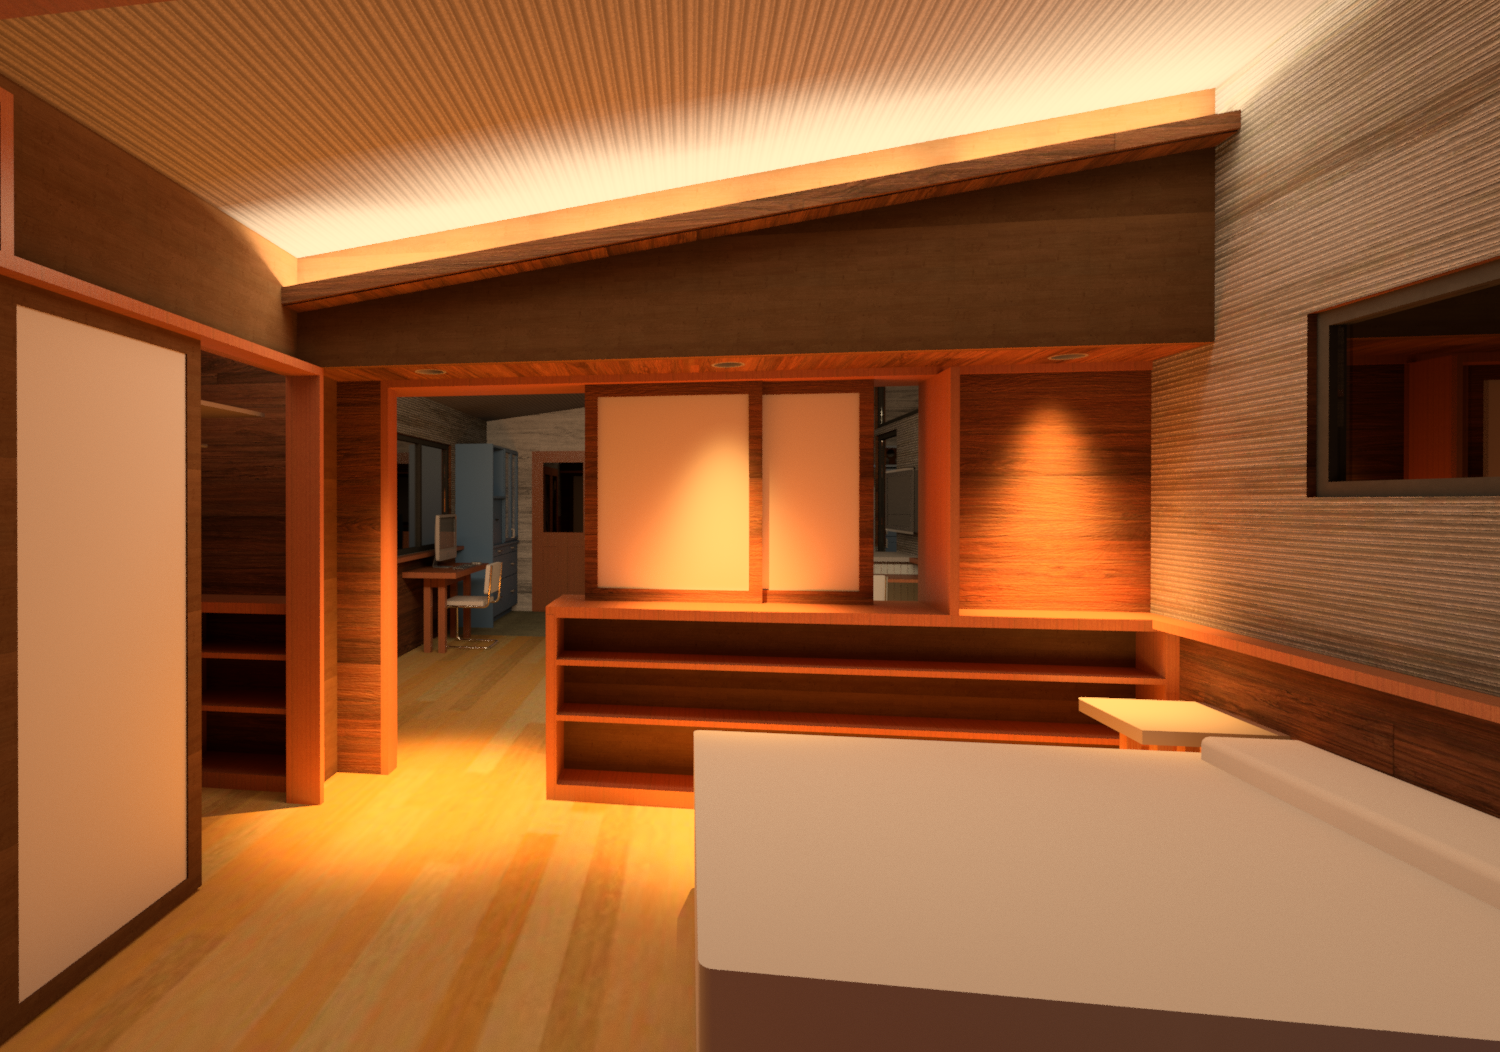 Michelle_Showhome3.rvt_2016-Jul-19_01-19-51PM-000_Master_Bedroom.png